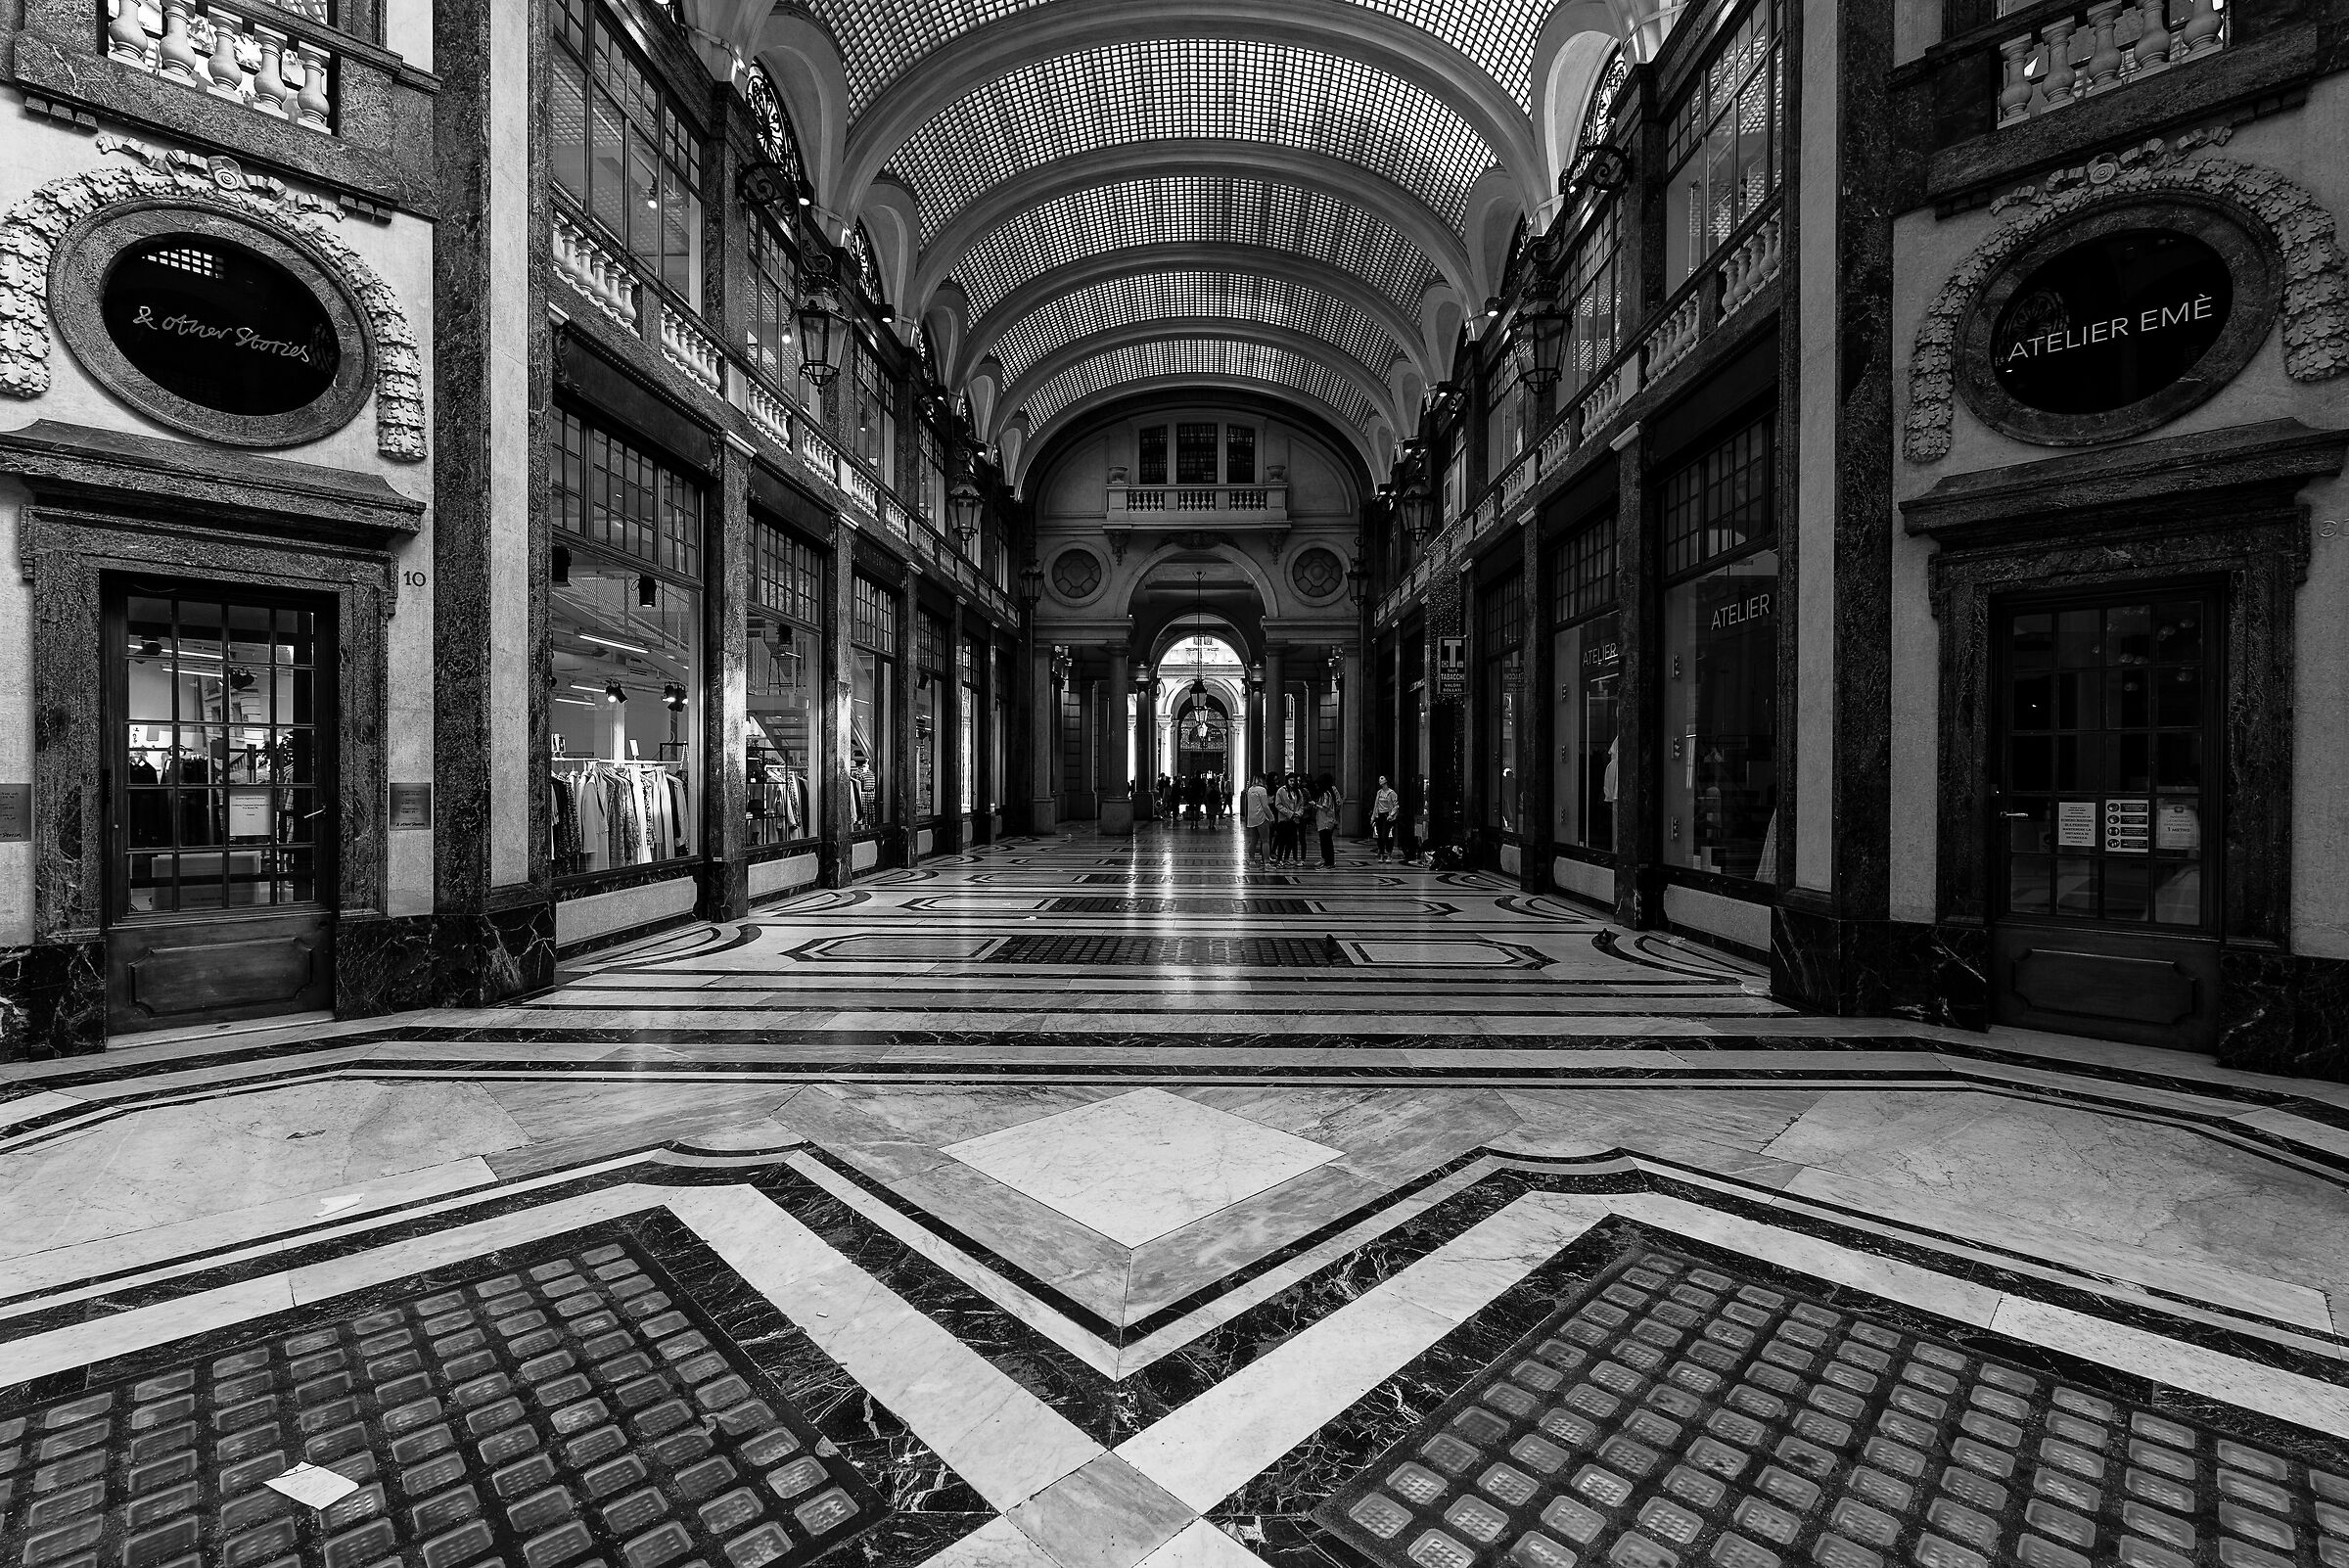 Galleries of Turin...